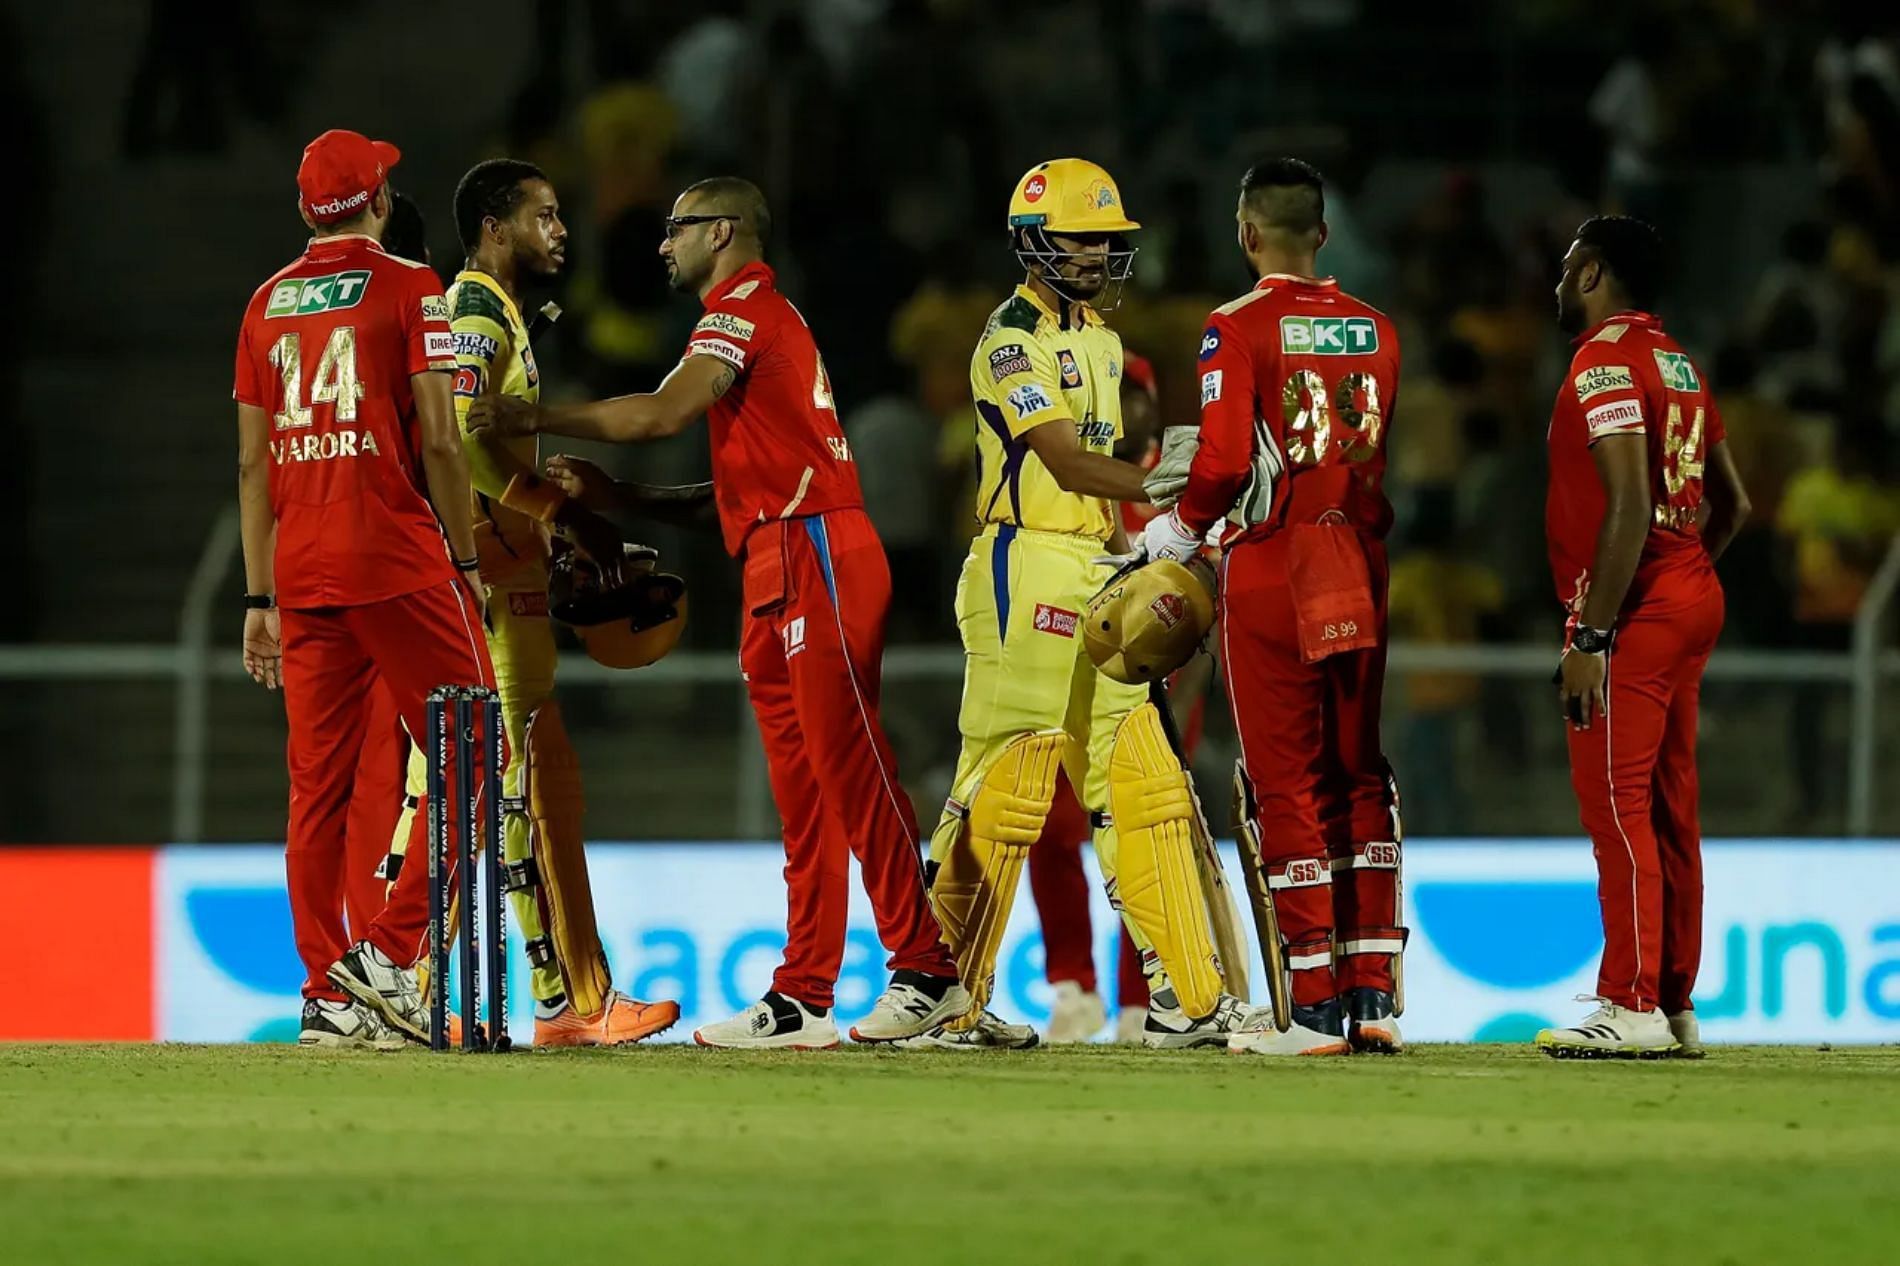 IPL 2022 schedule: Remaining IPL matches after 5th April